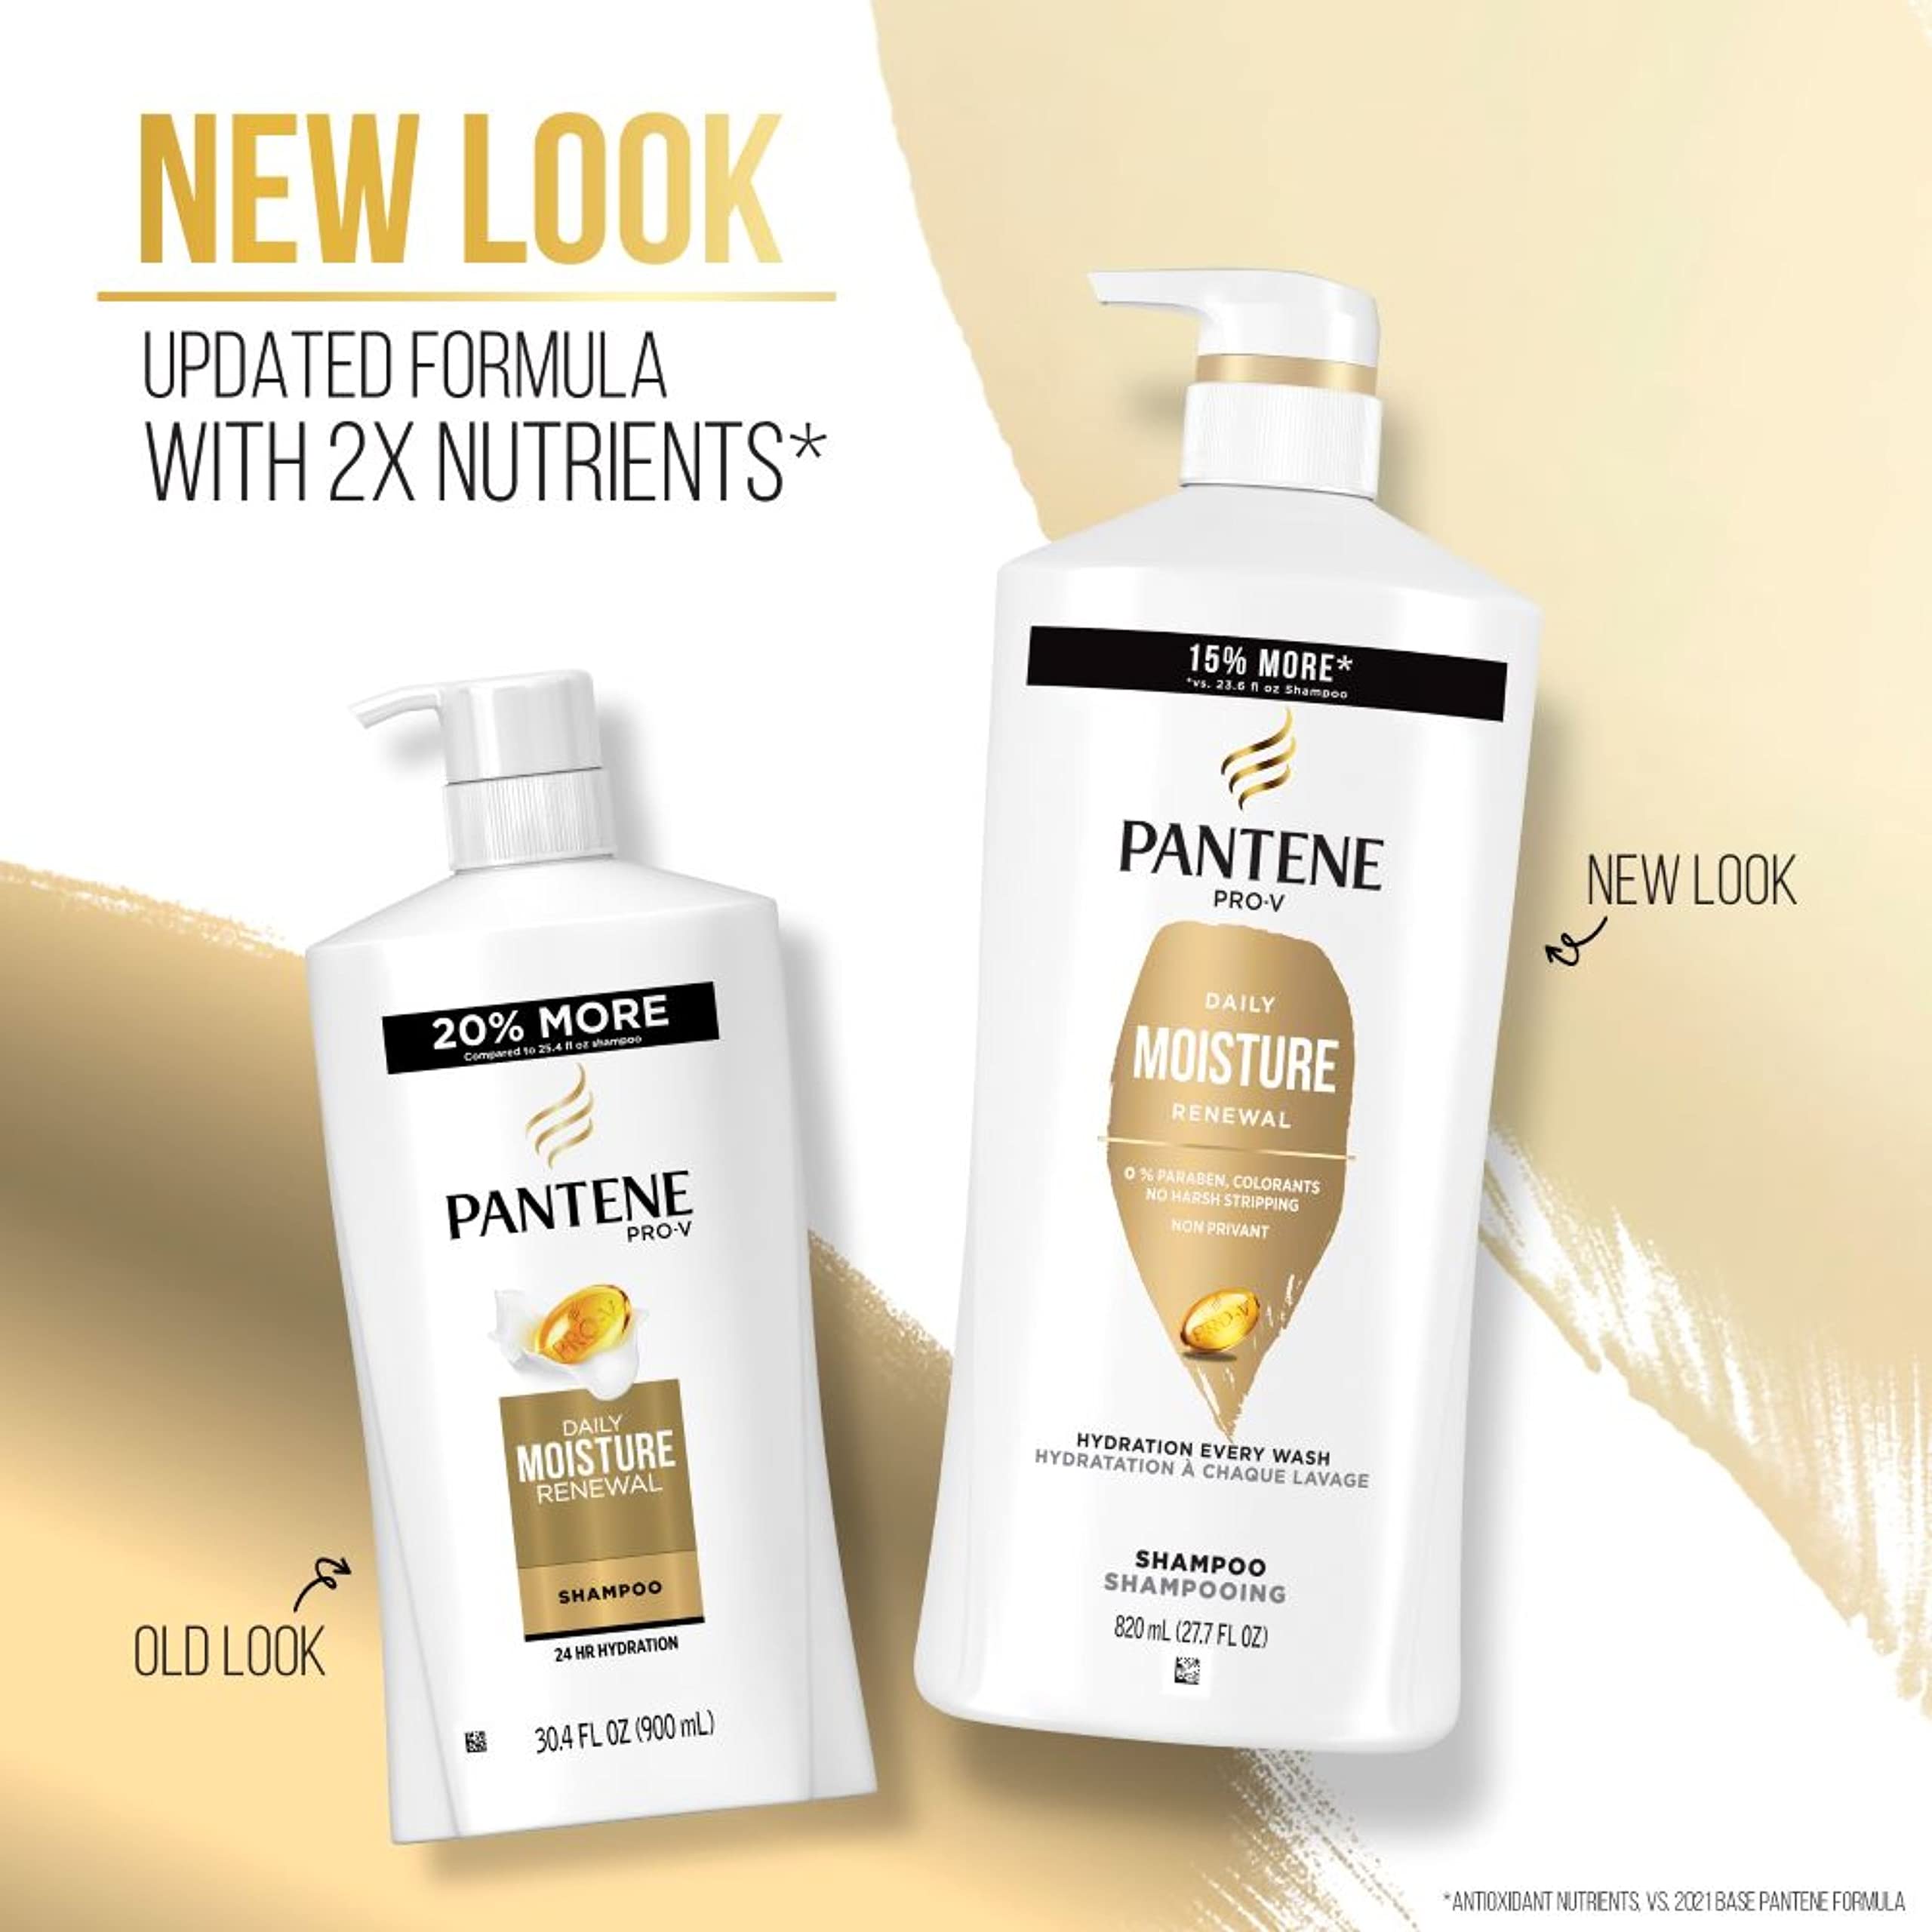 Pantene Shampoo Twin Pack with Hair Treament, Daily Moisture Renewal for Dry Hair, Safe for Color-Treated Hair